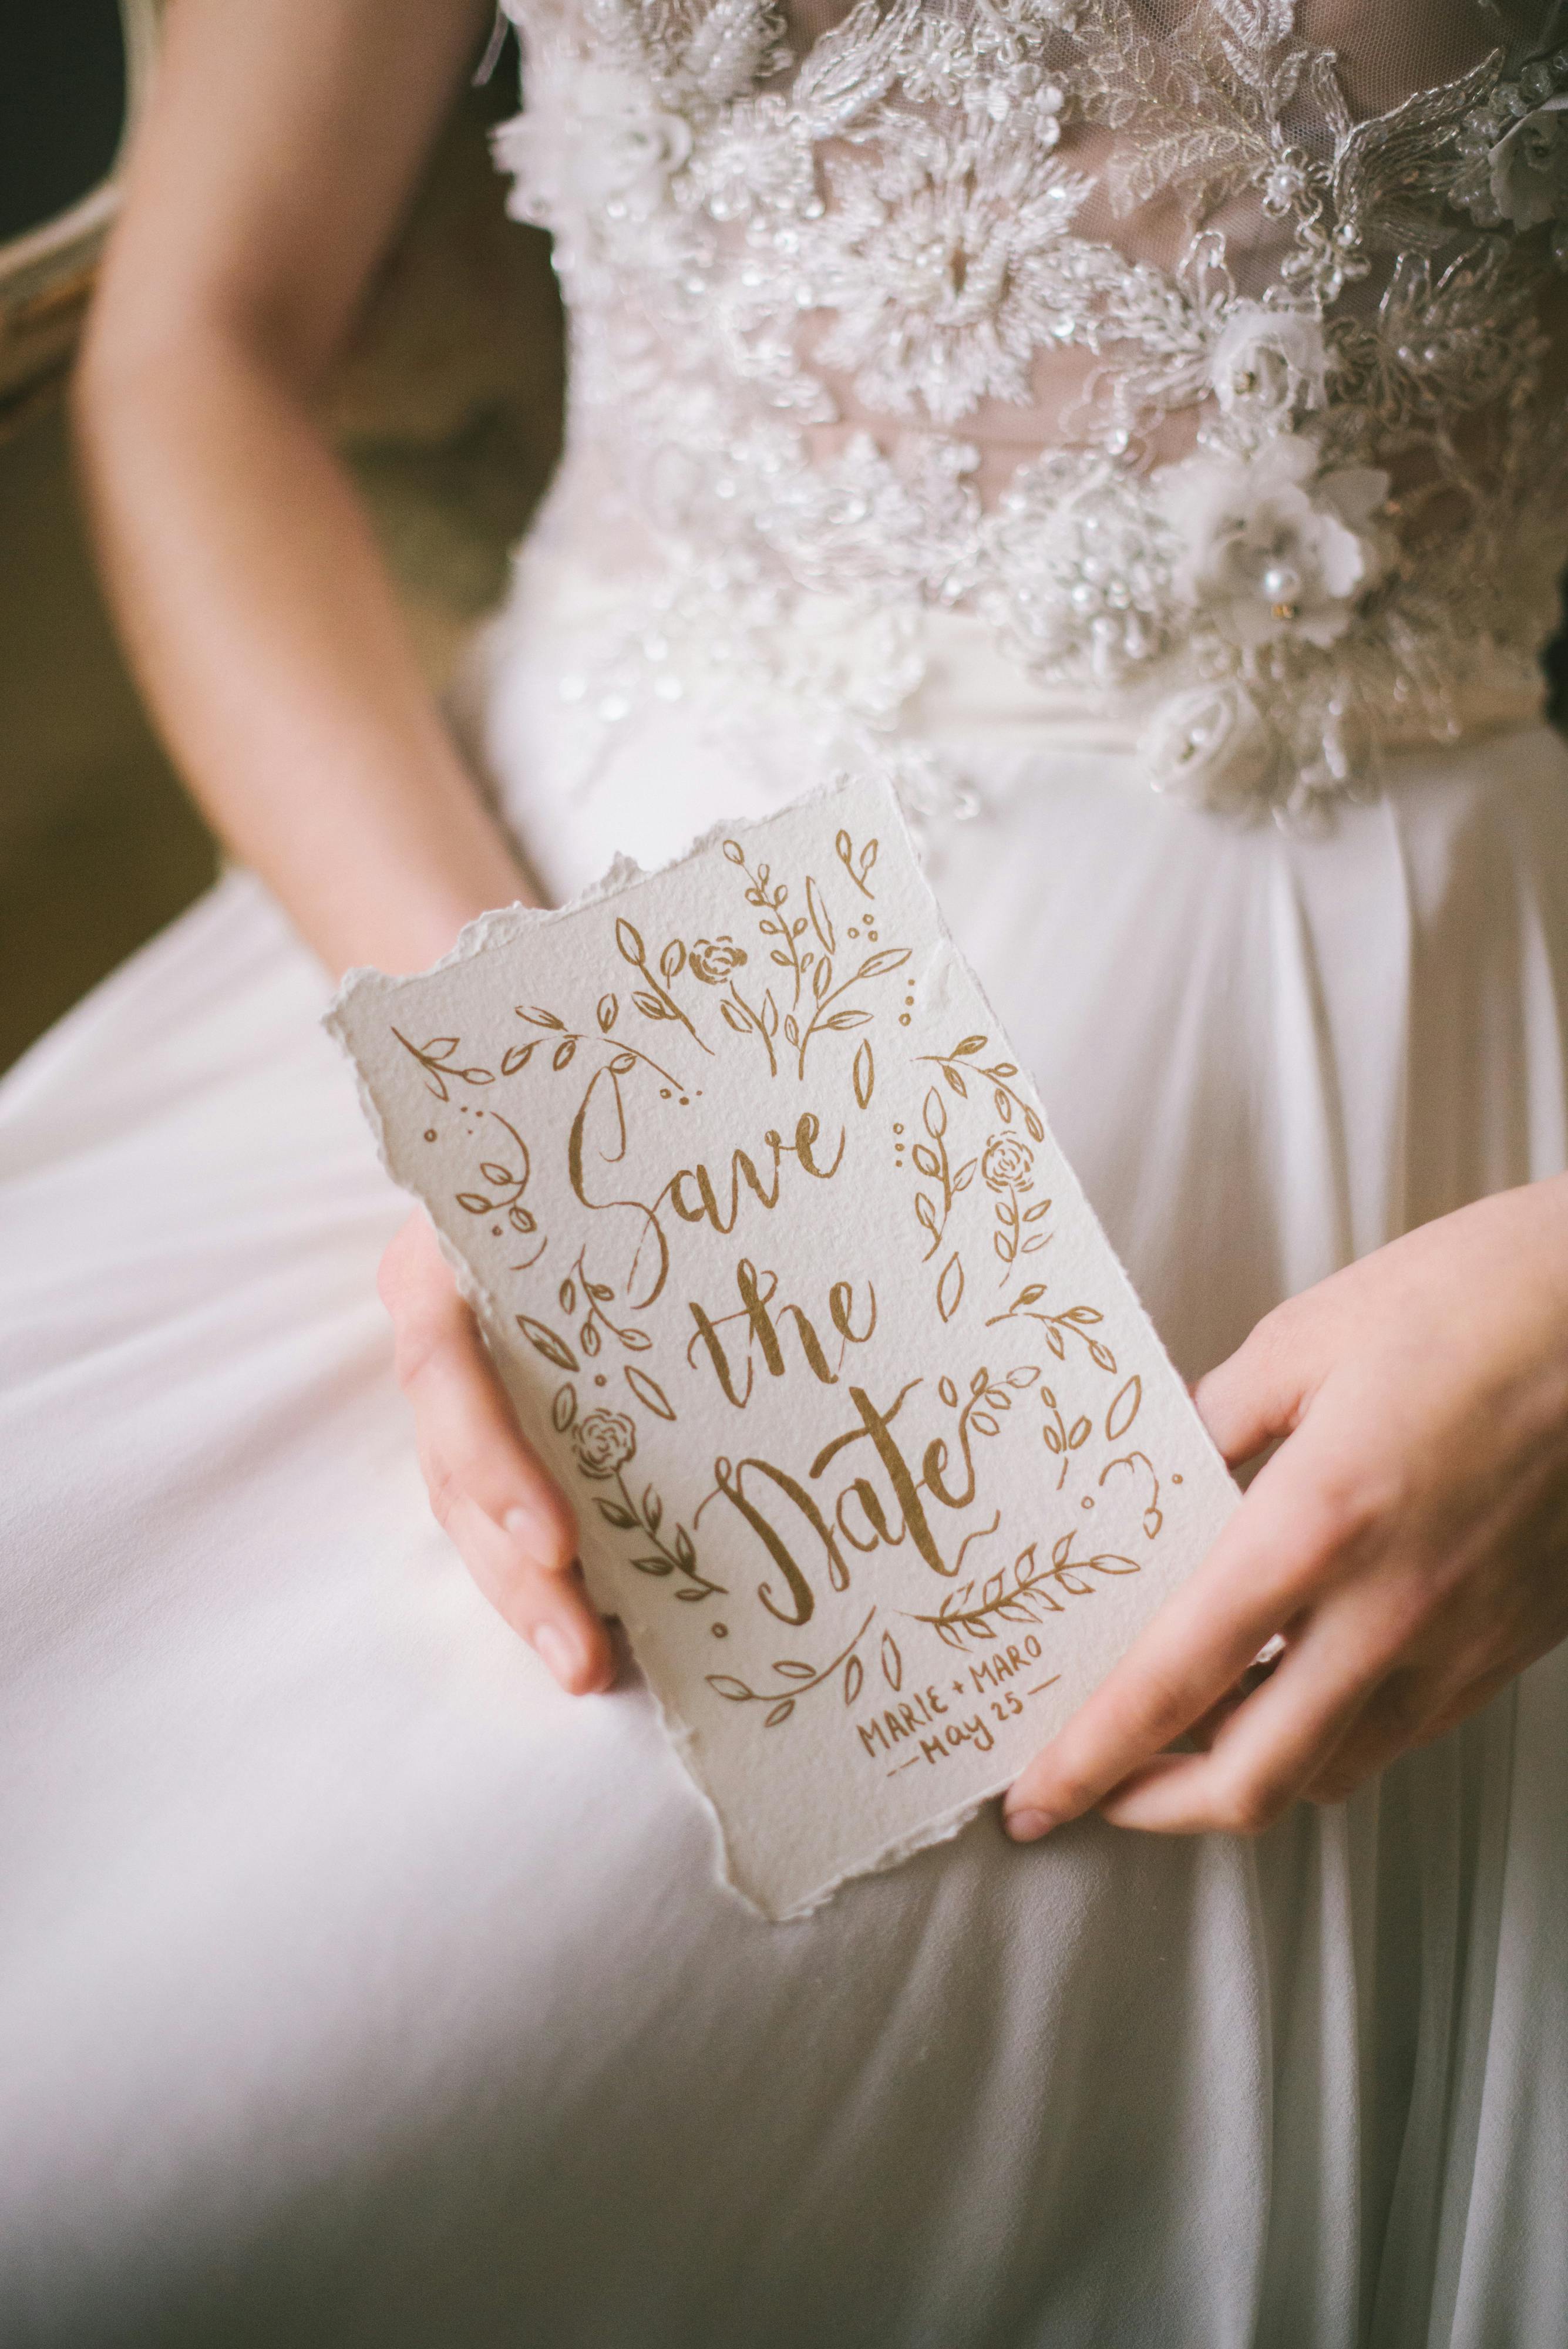 A woman in a white dress holding a wedding invitation | Source: Pexels